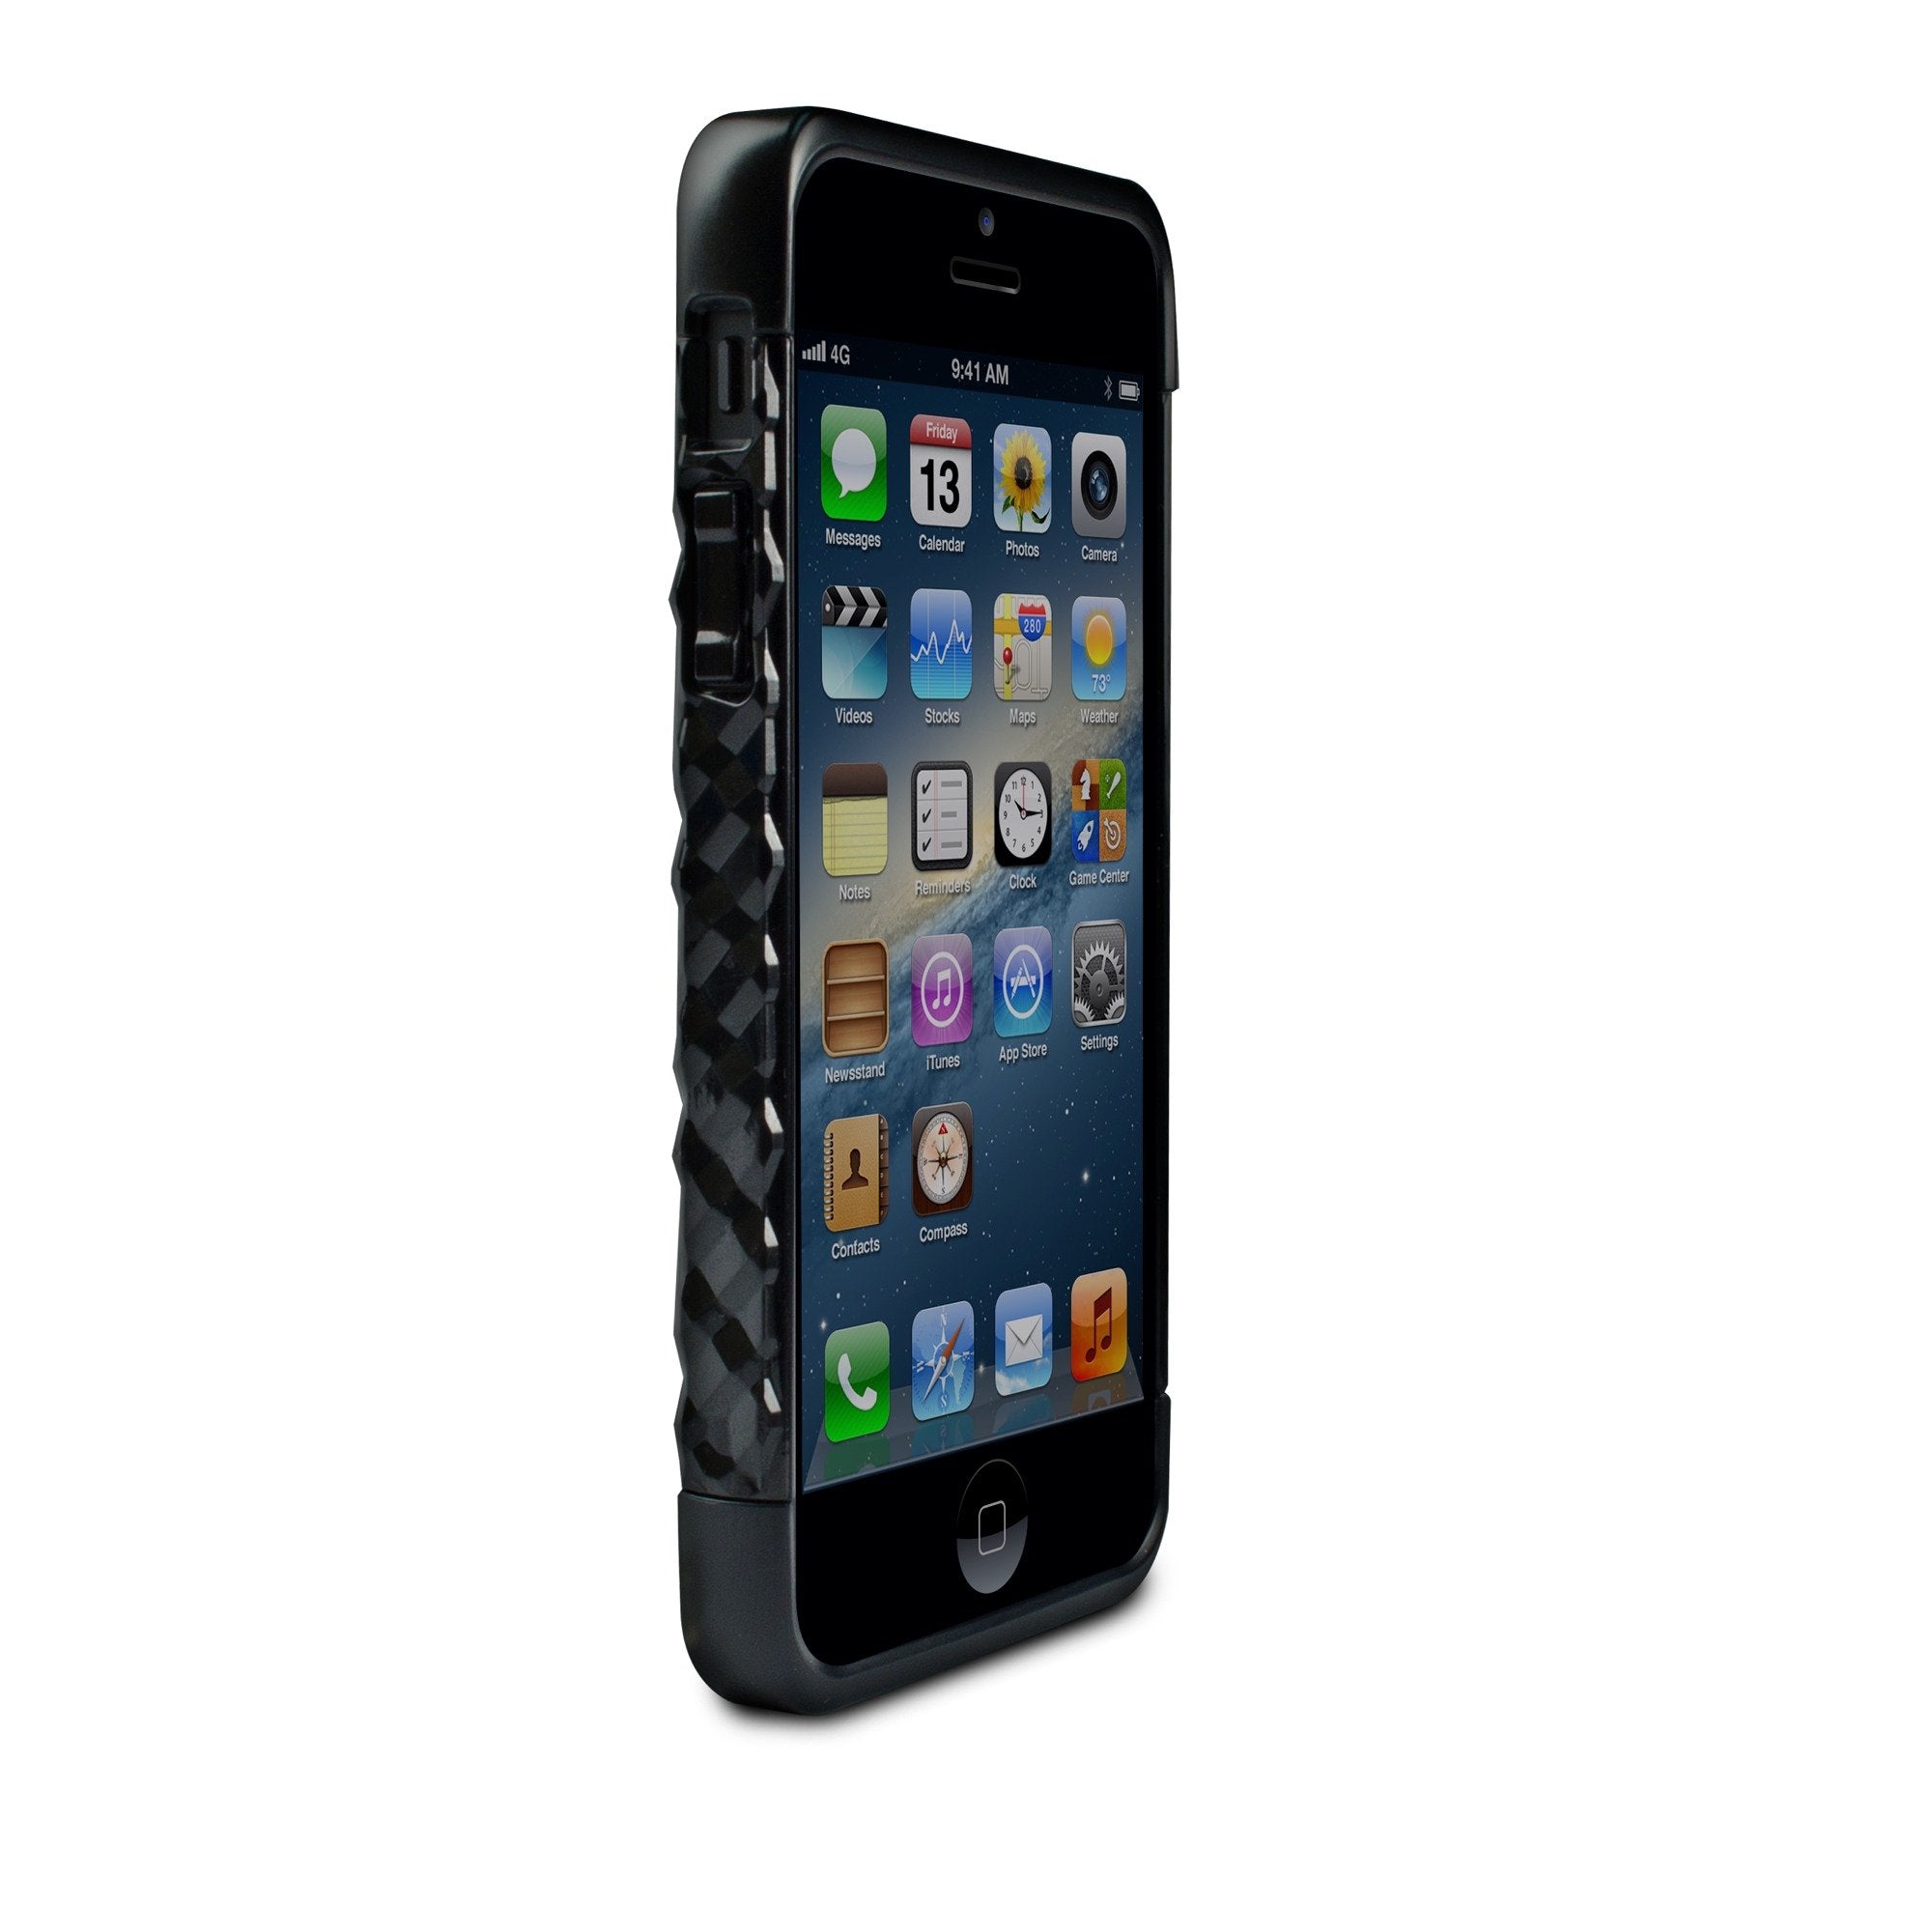 Marware ADRE1011 rEVOLUTION for iPhone 5 - 1 Pack - Retail Packaging - Black